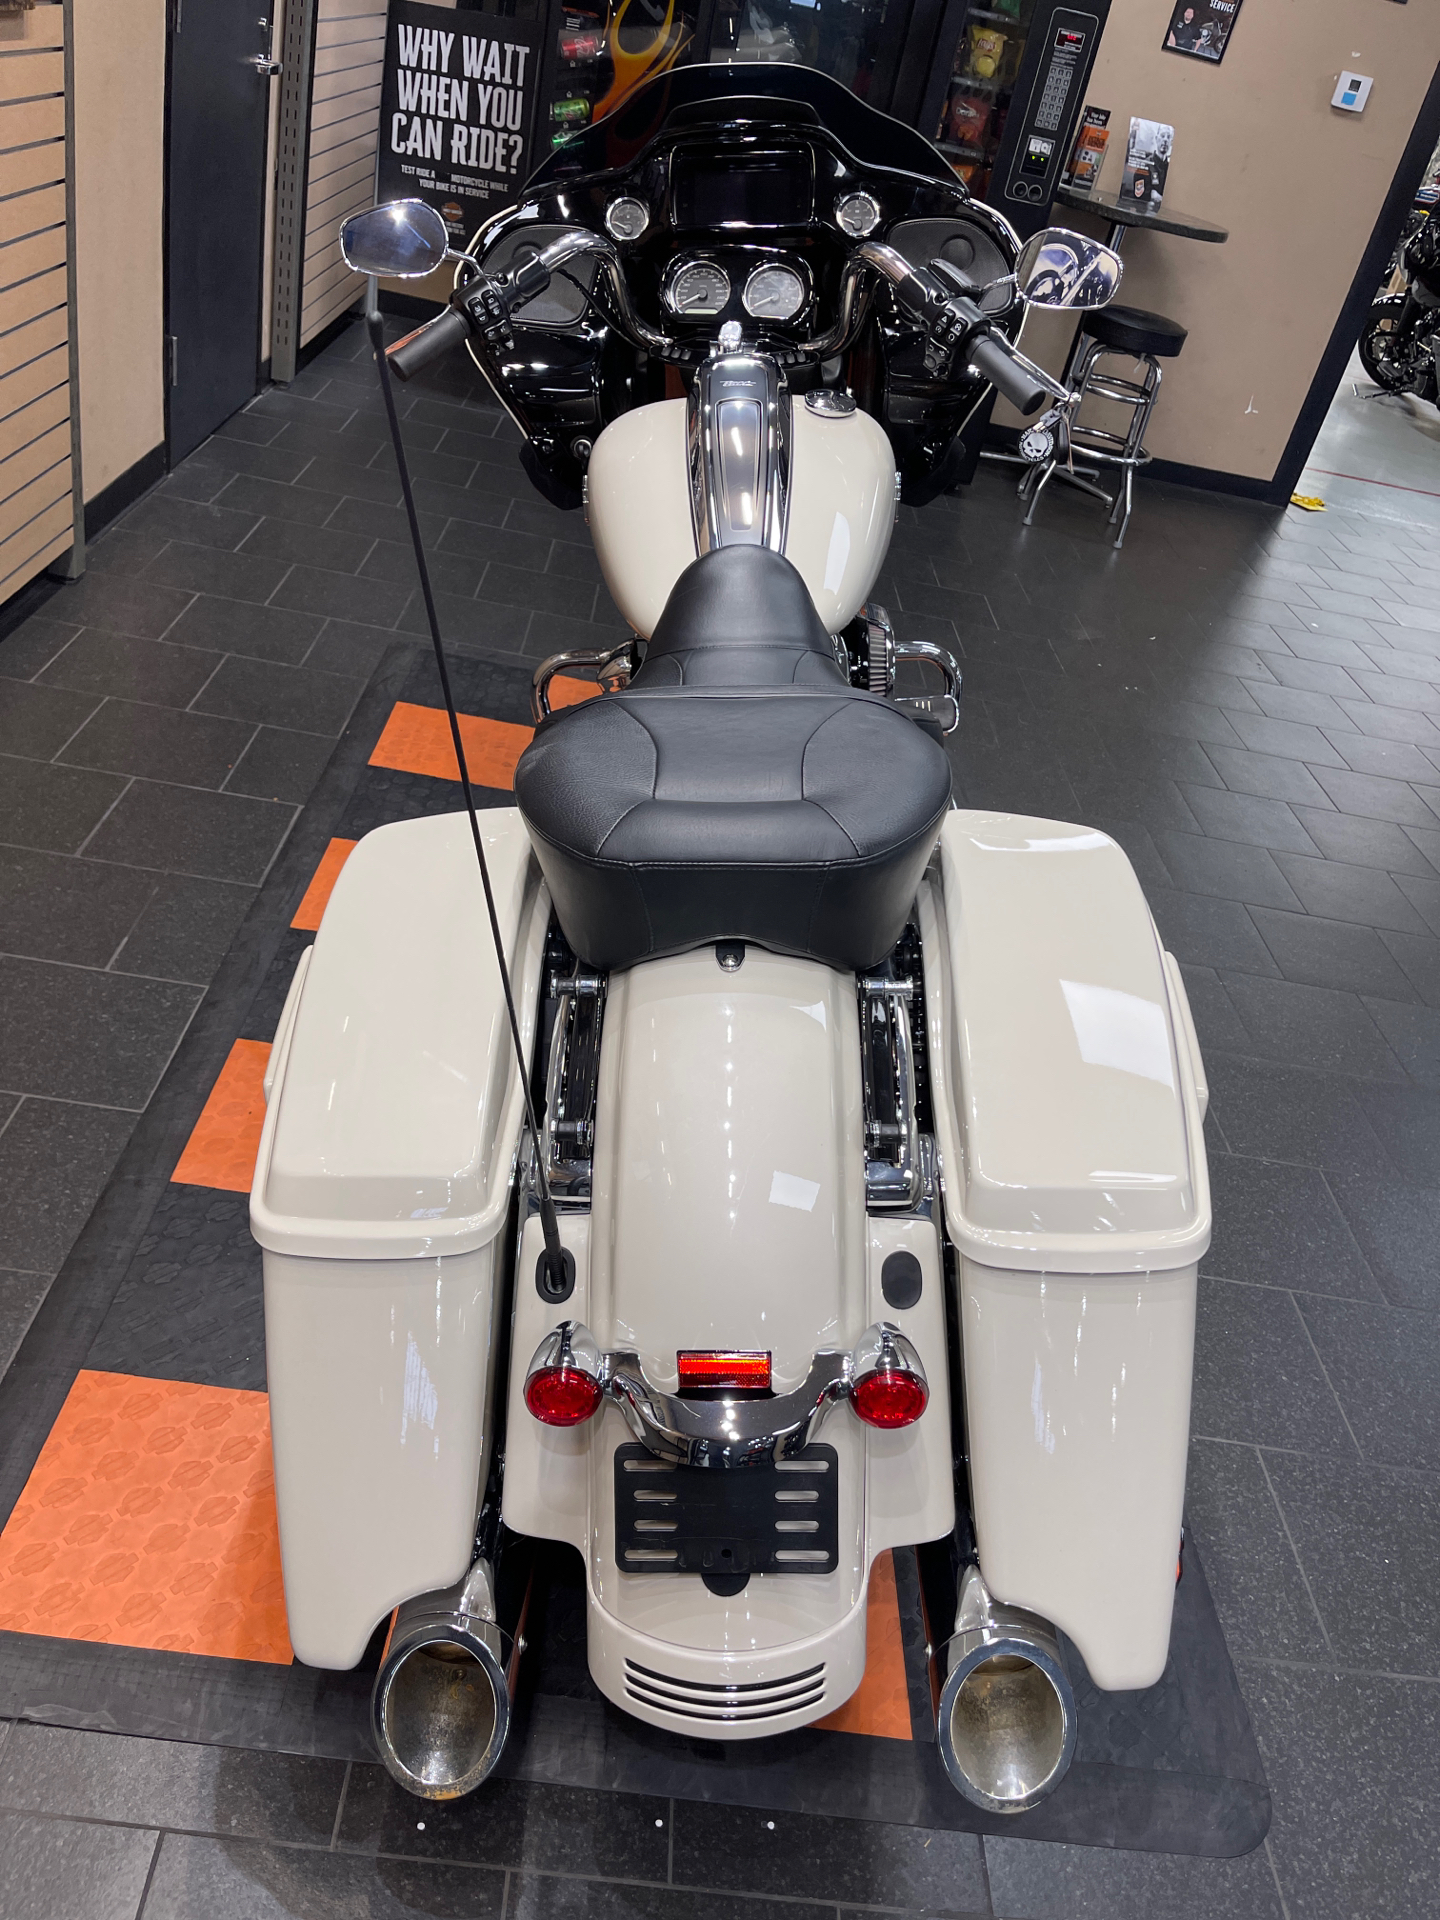 2022 Harley-Davidson Road Glide® Special in The Woodlands, Texas - Photo 5